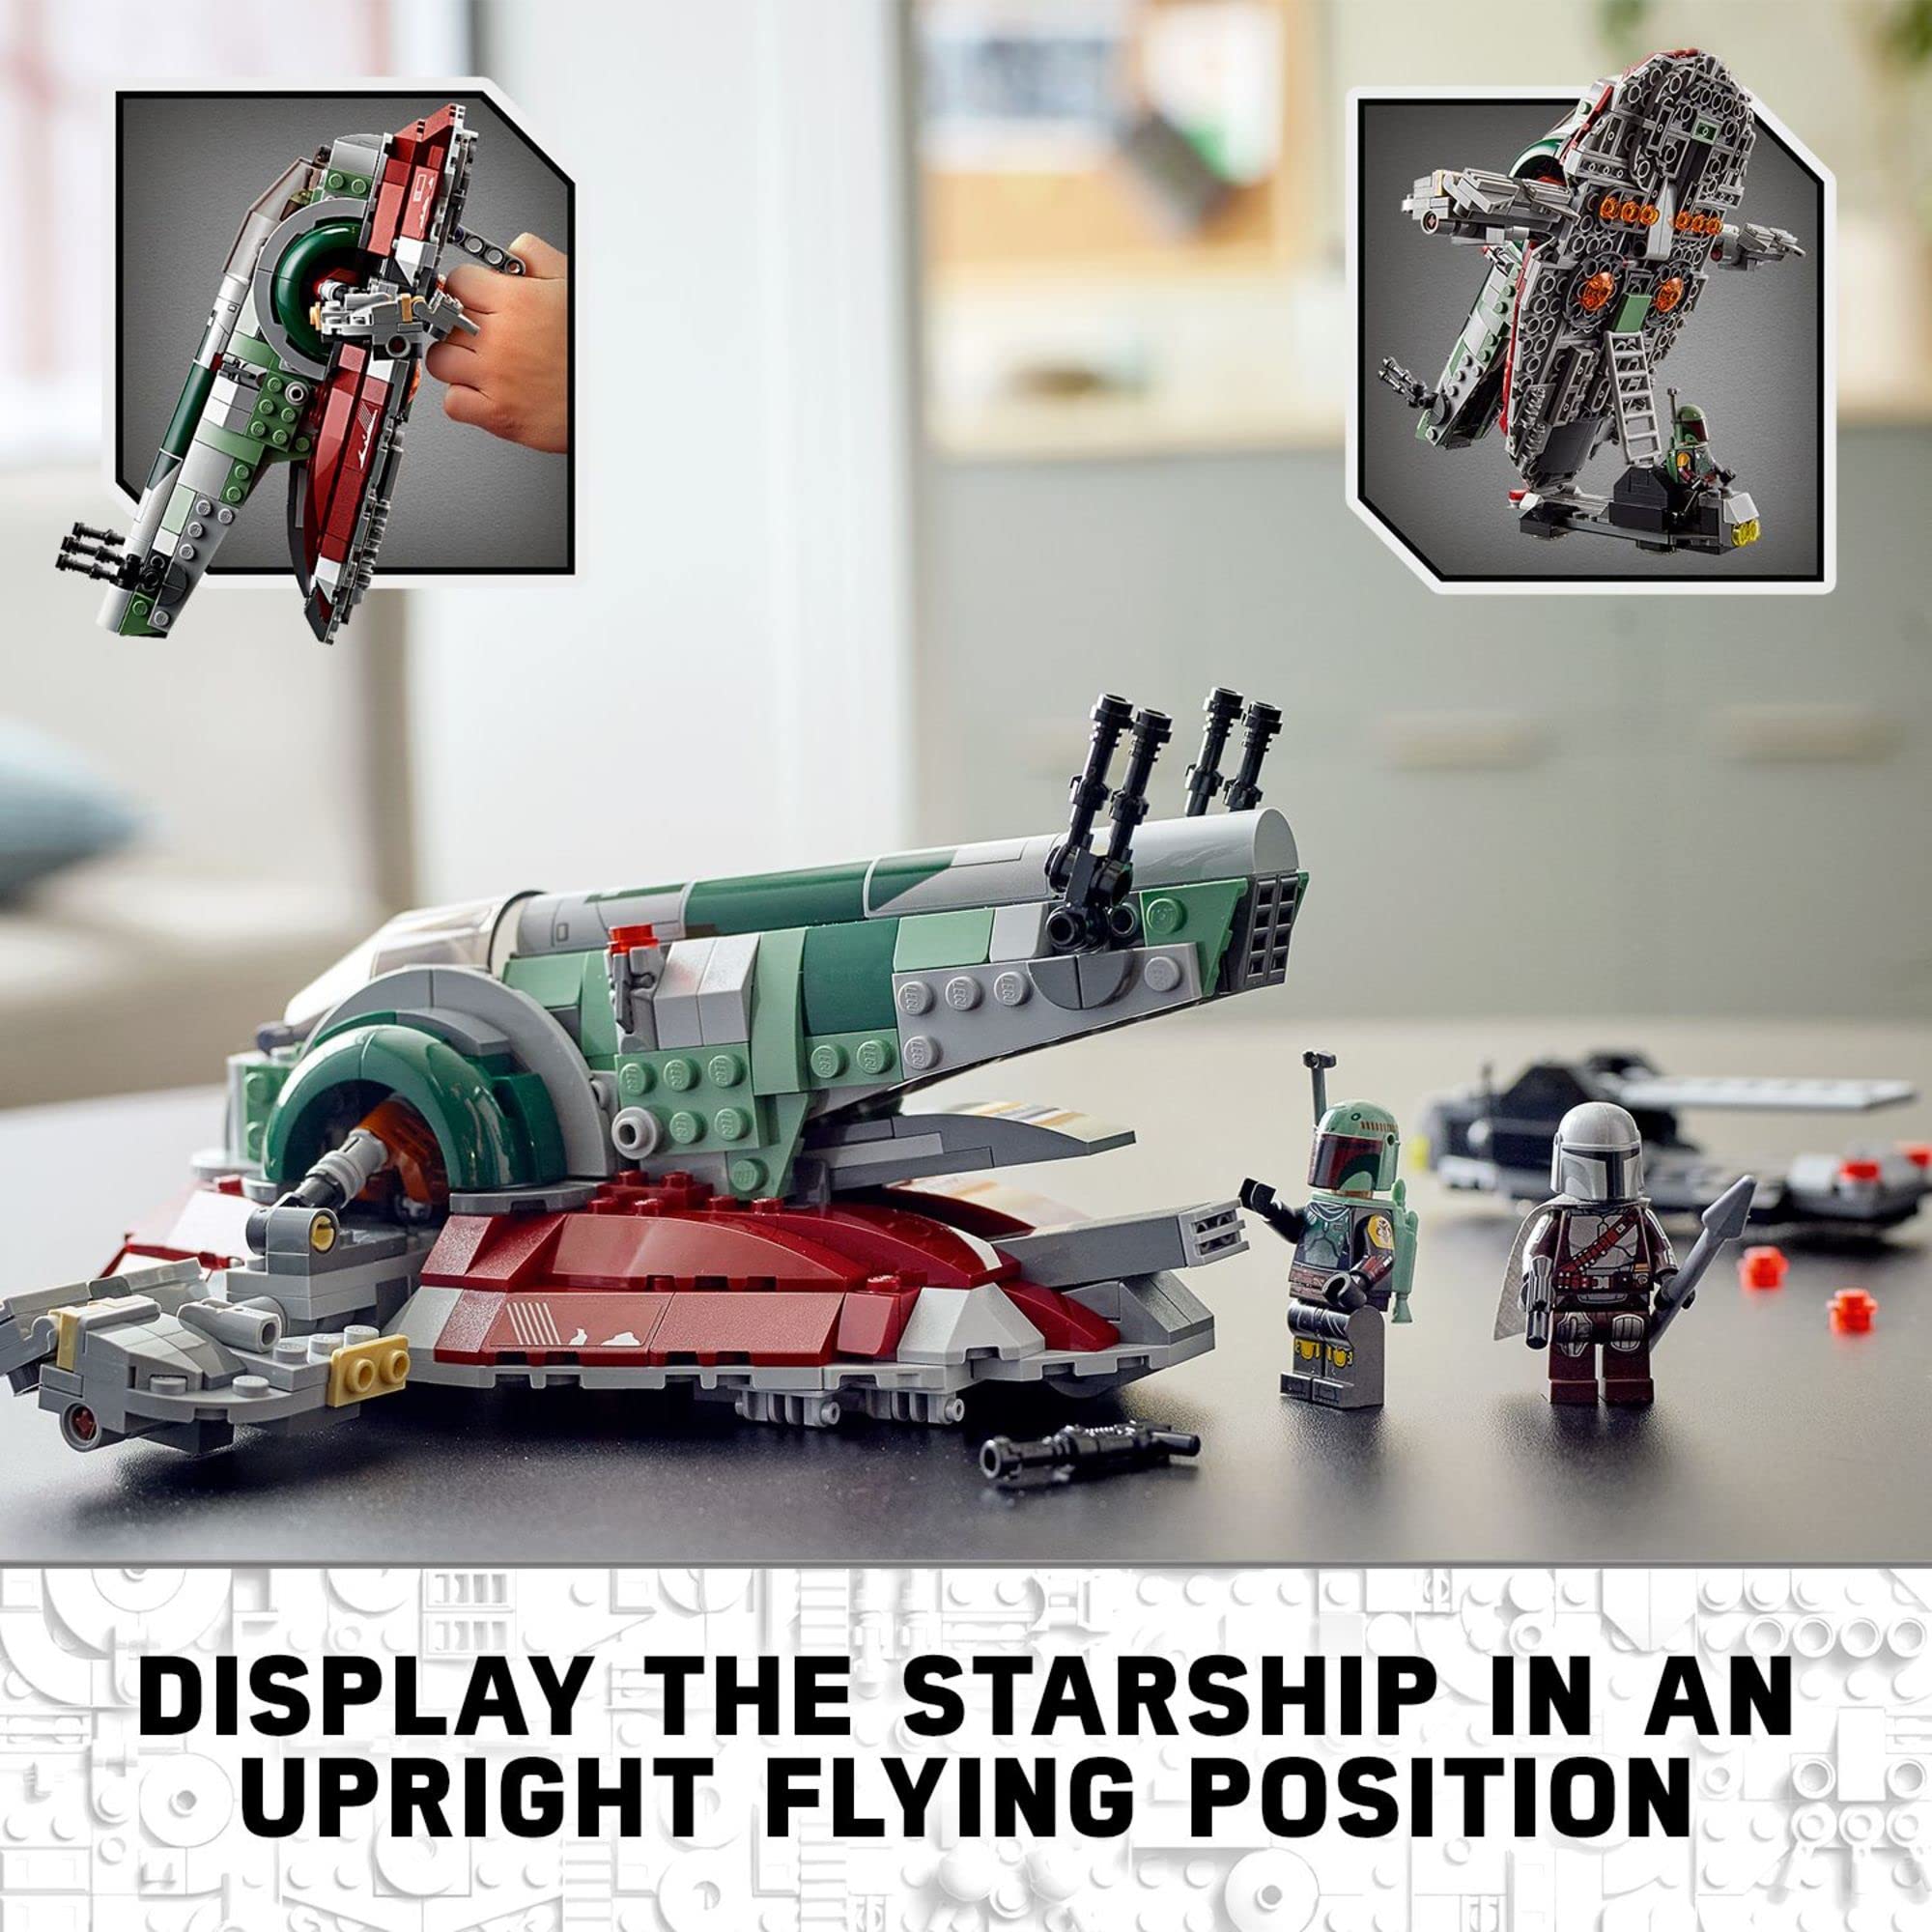 LEGO Star Wars Boba Fett Starship 75312 Building Toy - Mandalorian Model Set Featuring Iconic Starfighter with Rotating Wings and 2 Minifigures, Fun and Imaginative Build for Kids Age 9+